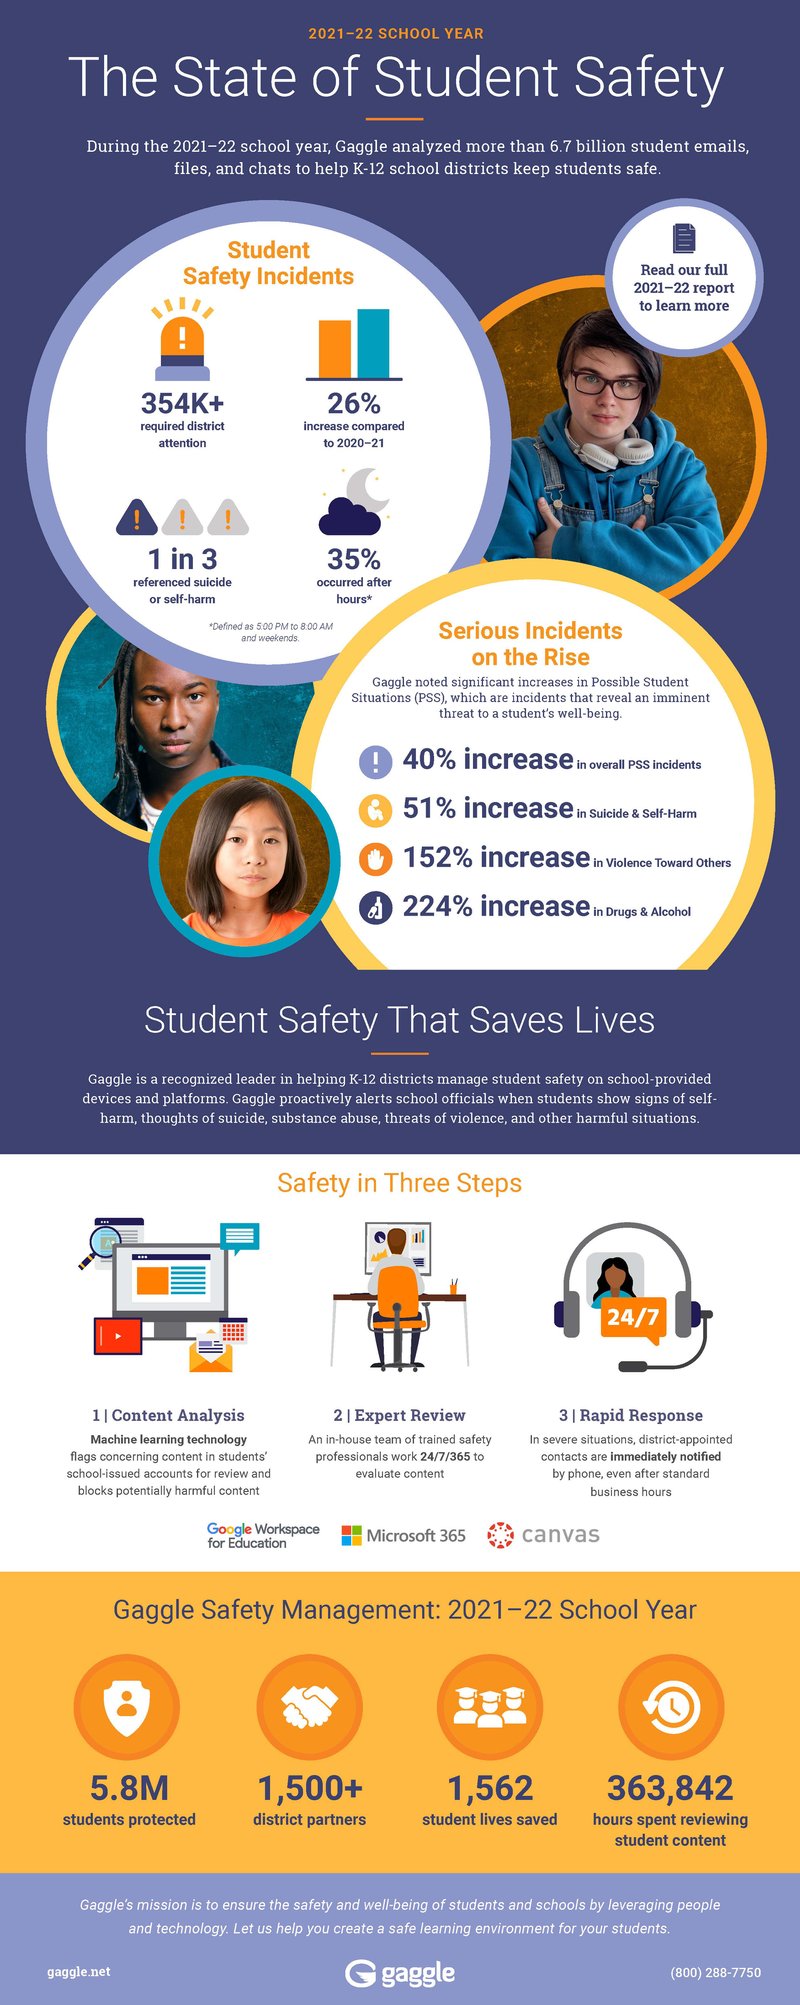 TheStateofStudentSafety_2021-22_Infographic